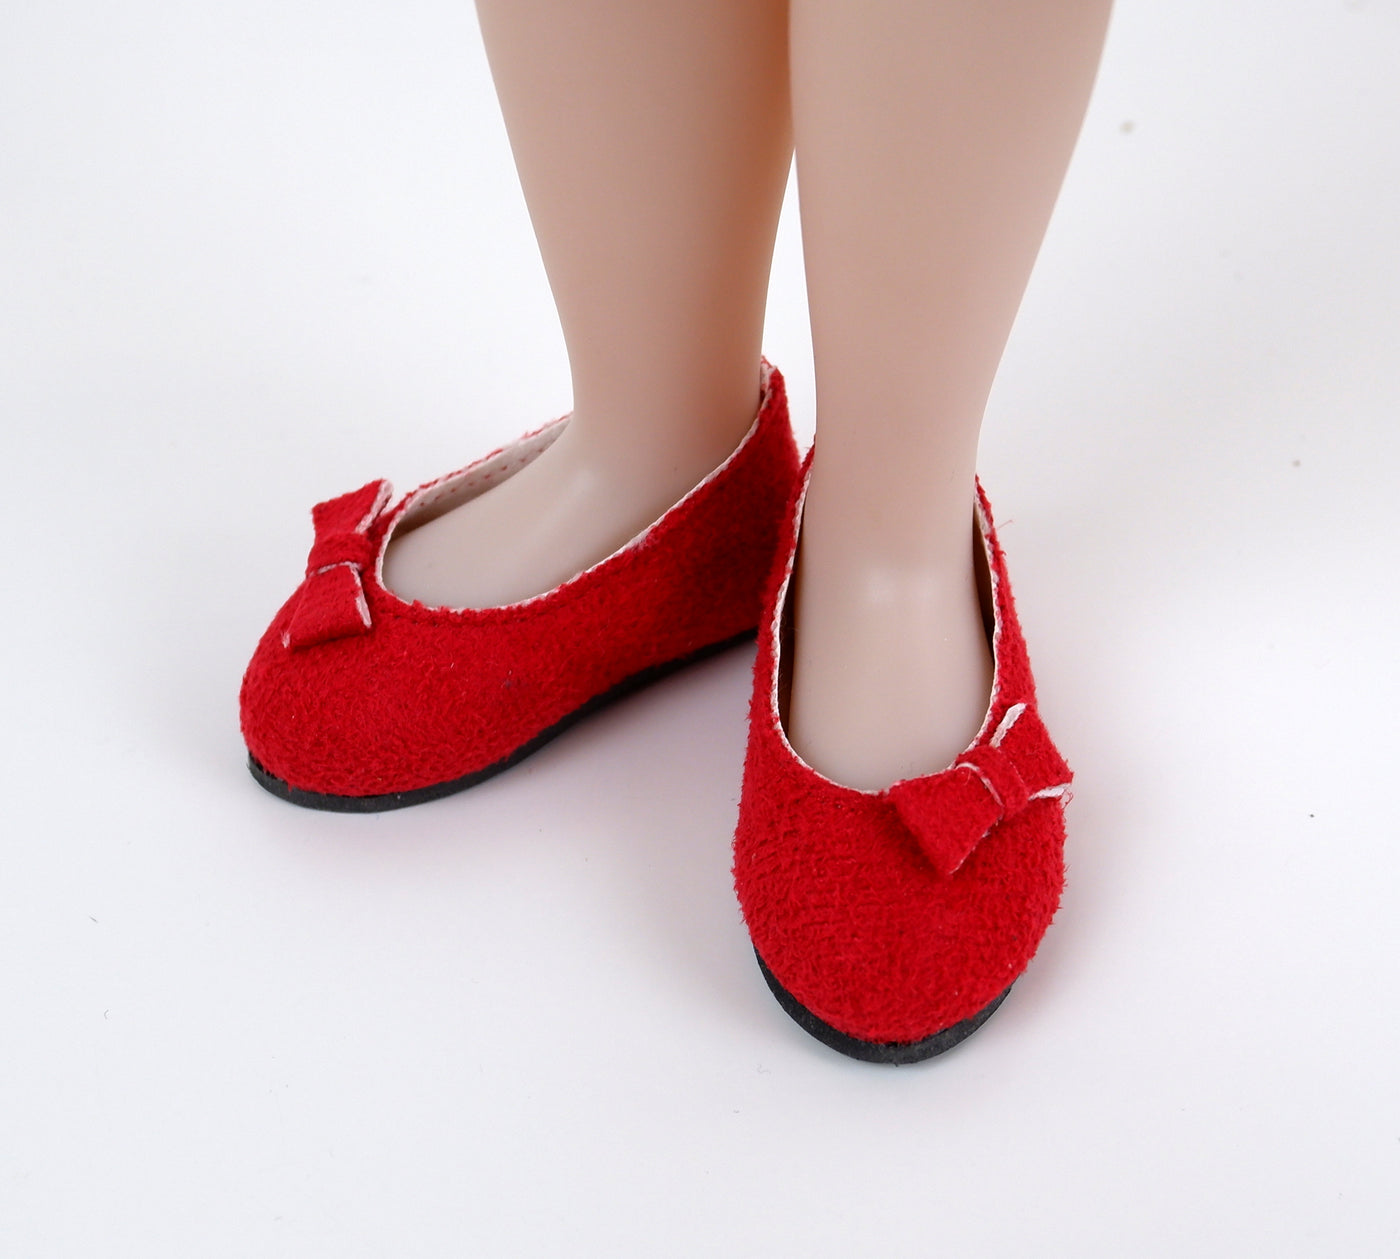 Bow Toe Ballet Flats - Suede Lipstick Red